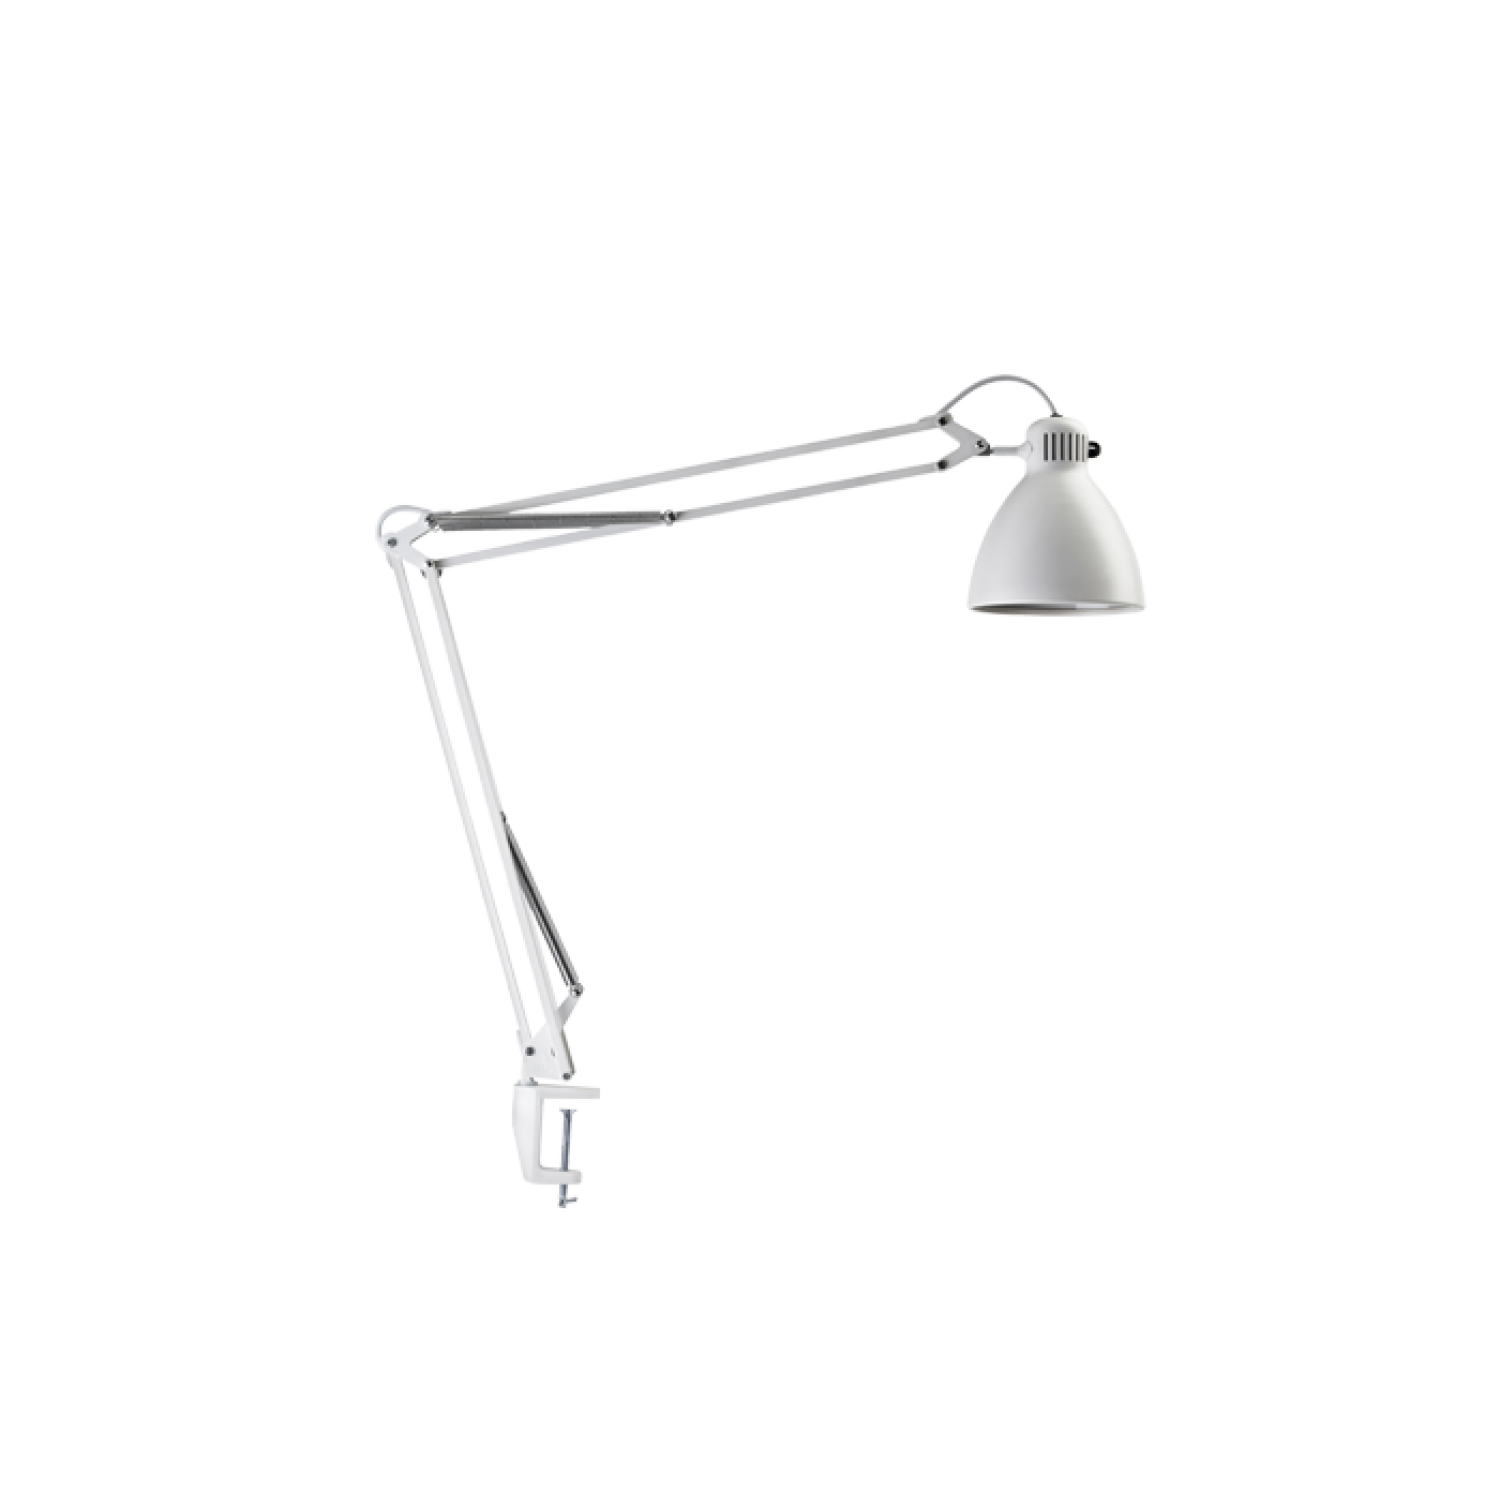 Luxo L-1 LED task light with edge clamp, White